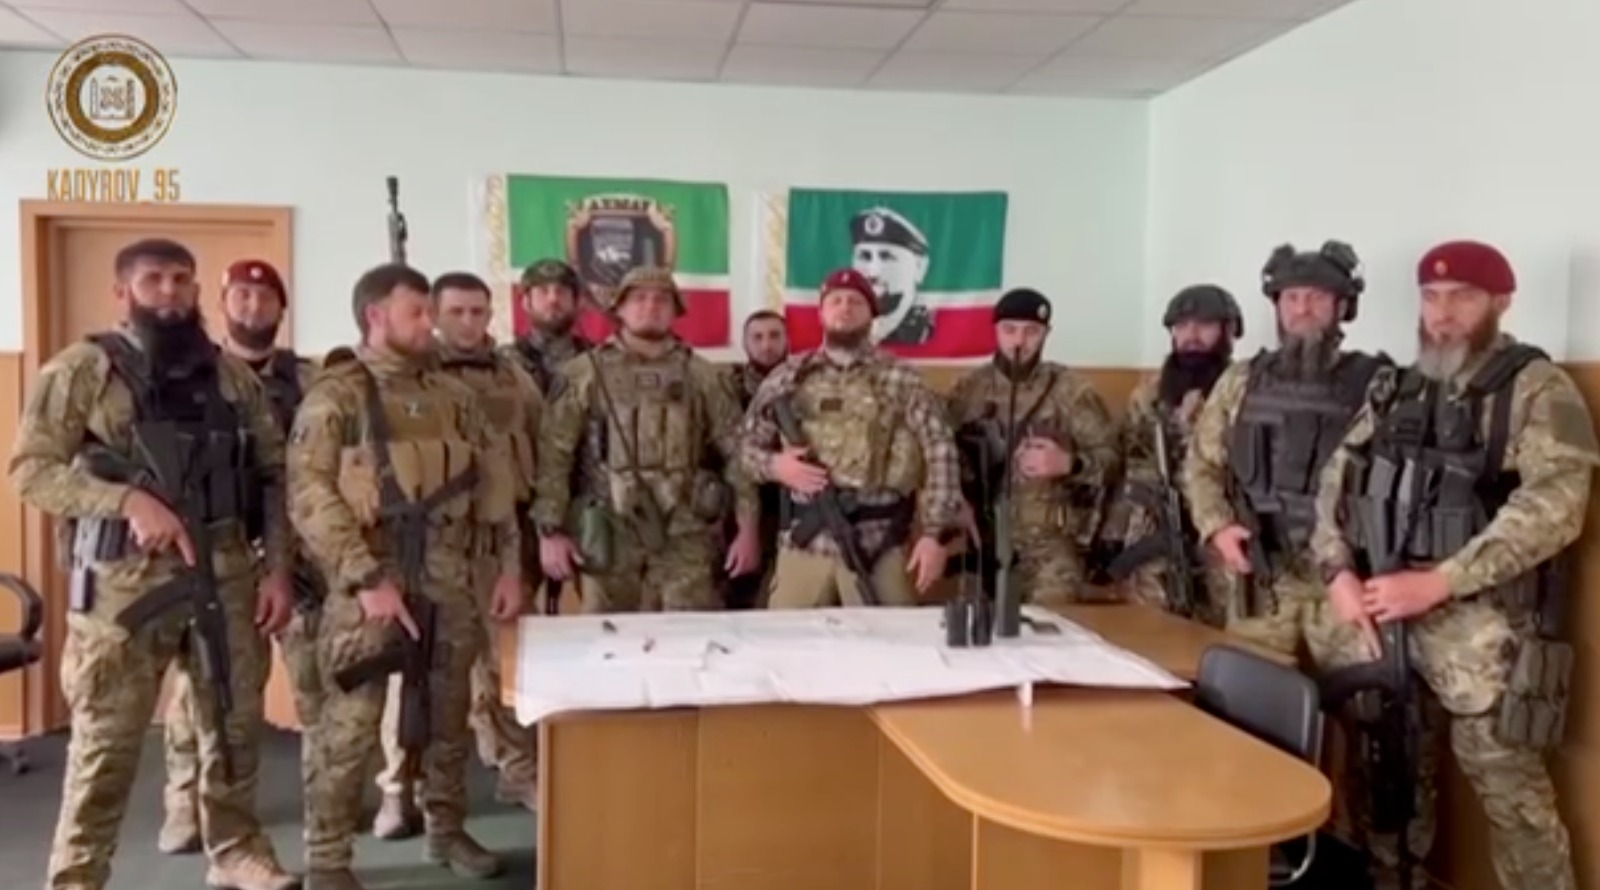 Kadyrov moved the Chechen special forces around the nuclear power plant: “We are occupying strategic points in Zaporizhia.”